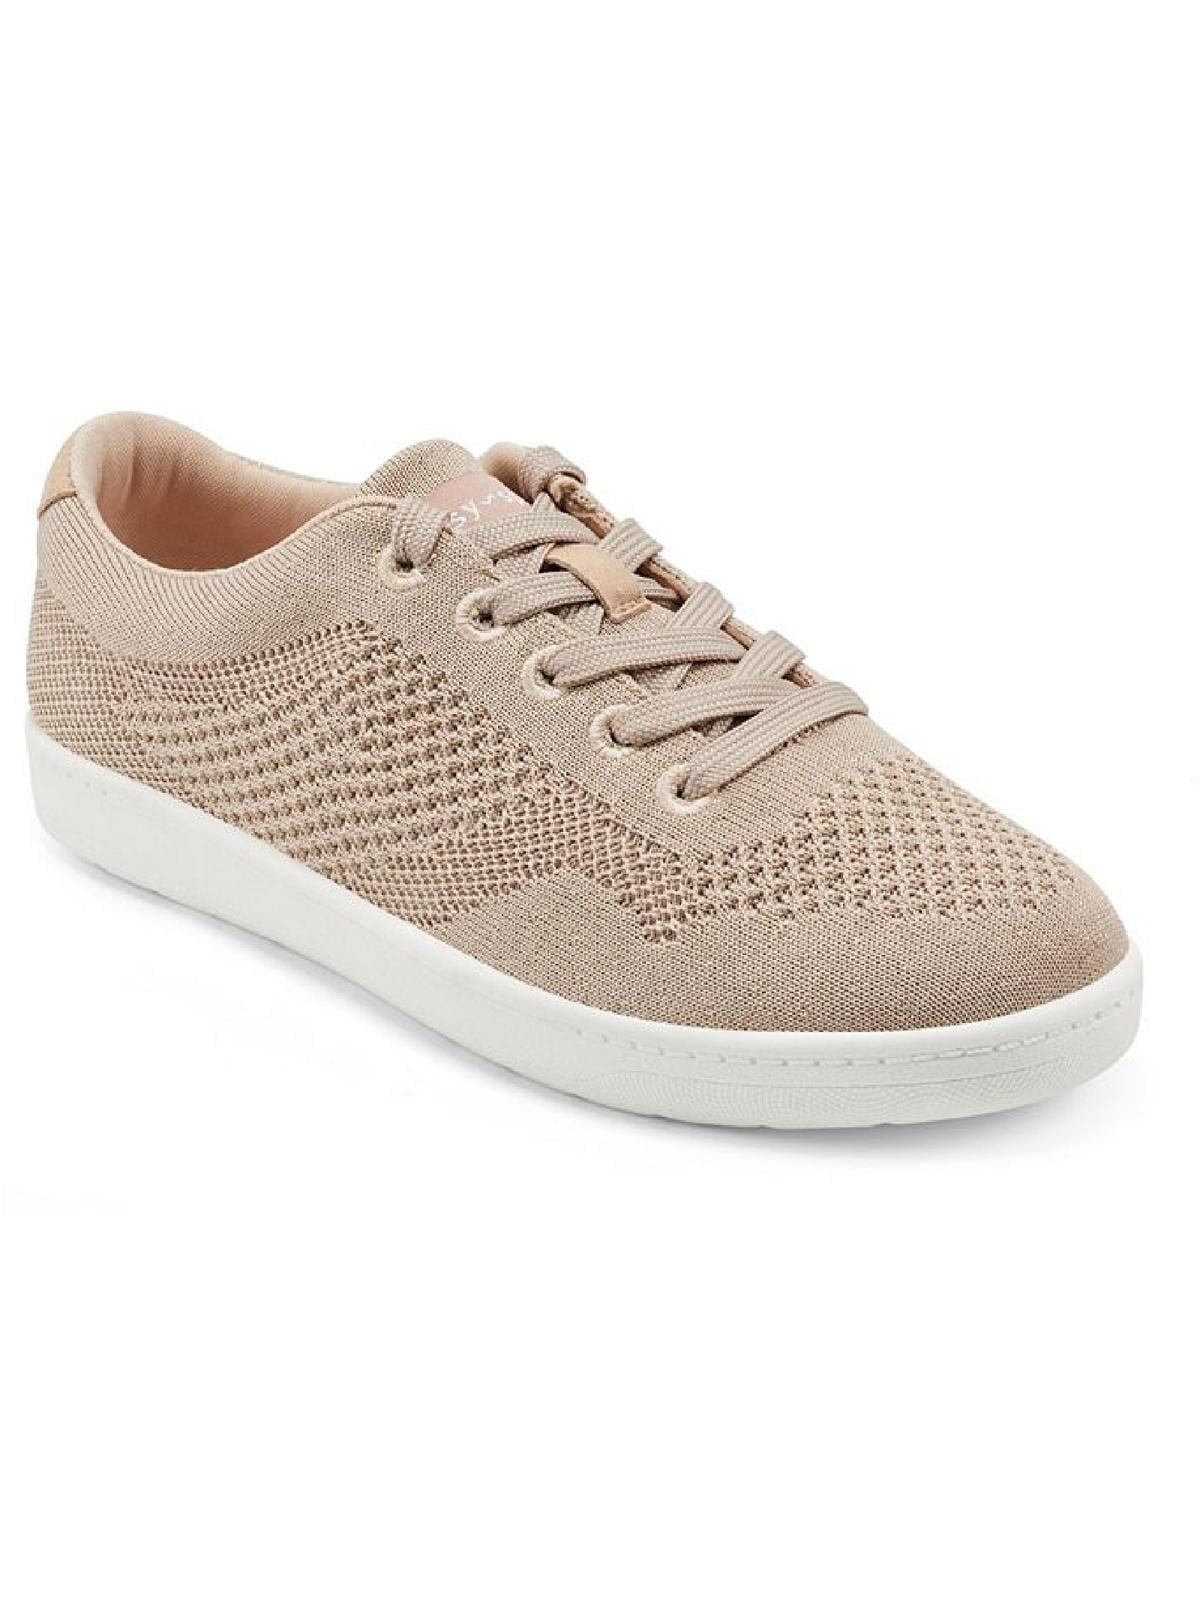 Easy Spirit Womens Maite 2 Mesh Lace-Up Casual and Fashion Sneakers ...